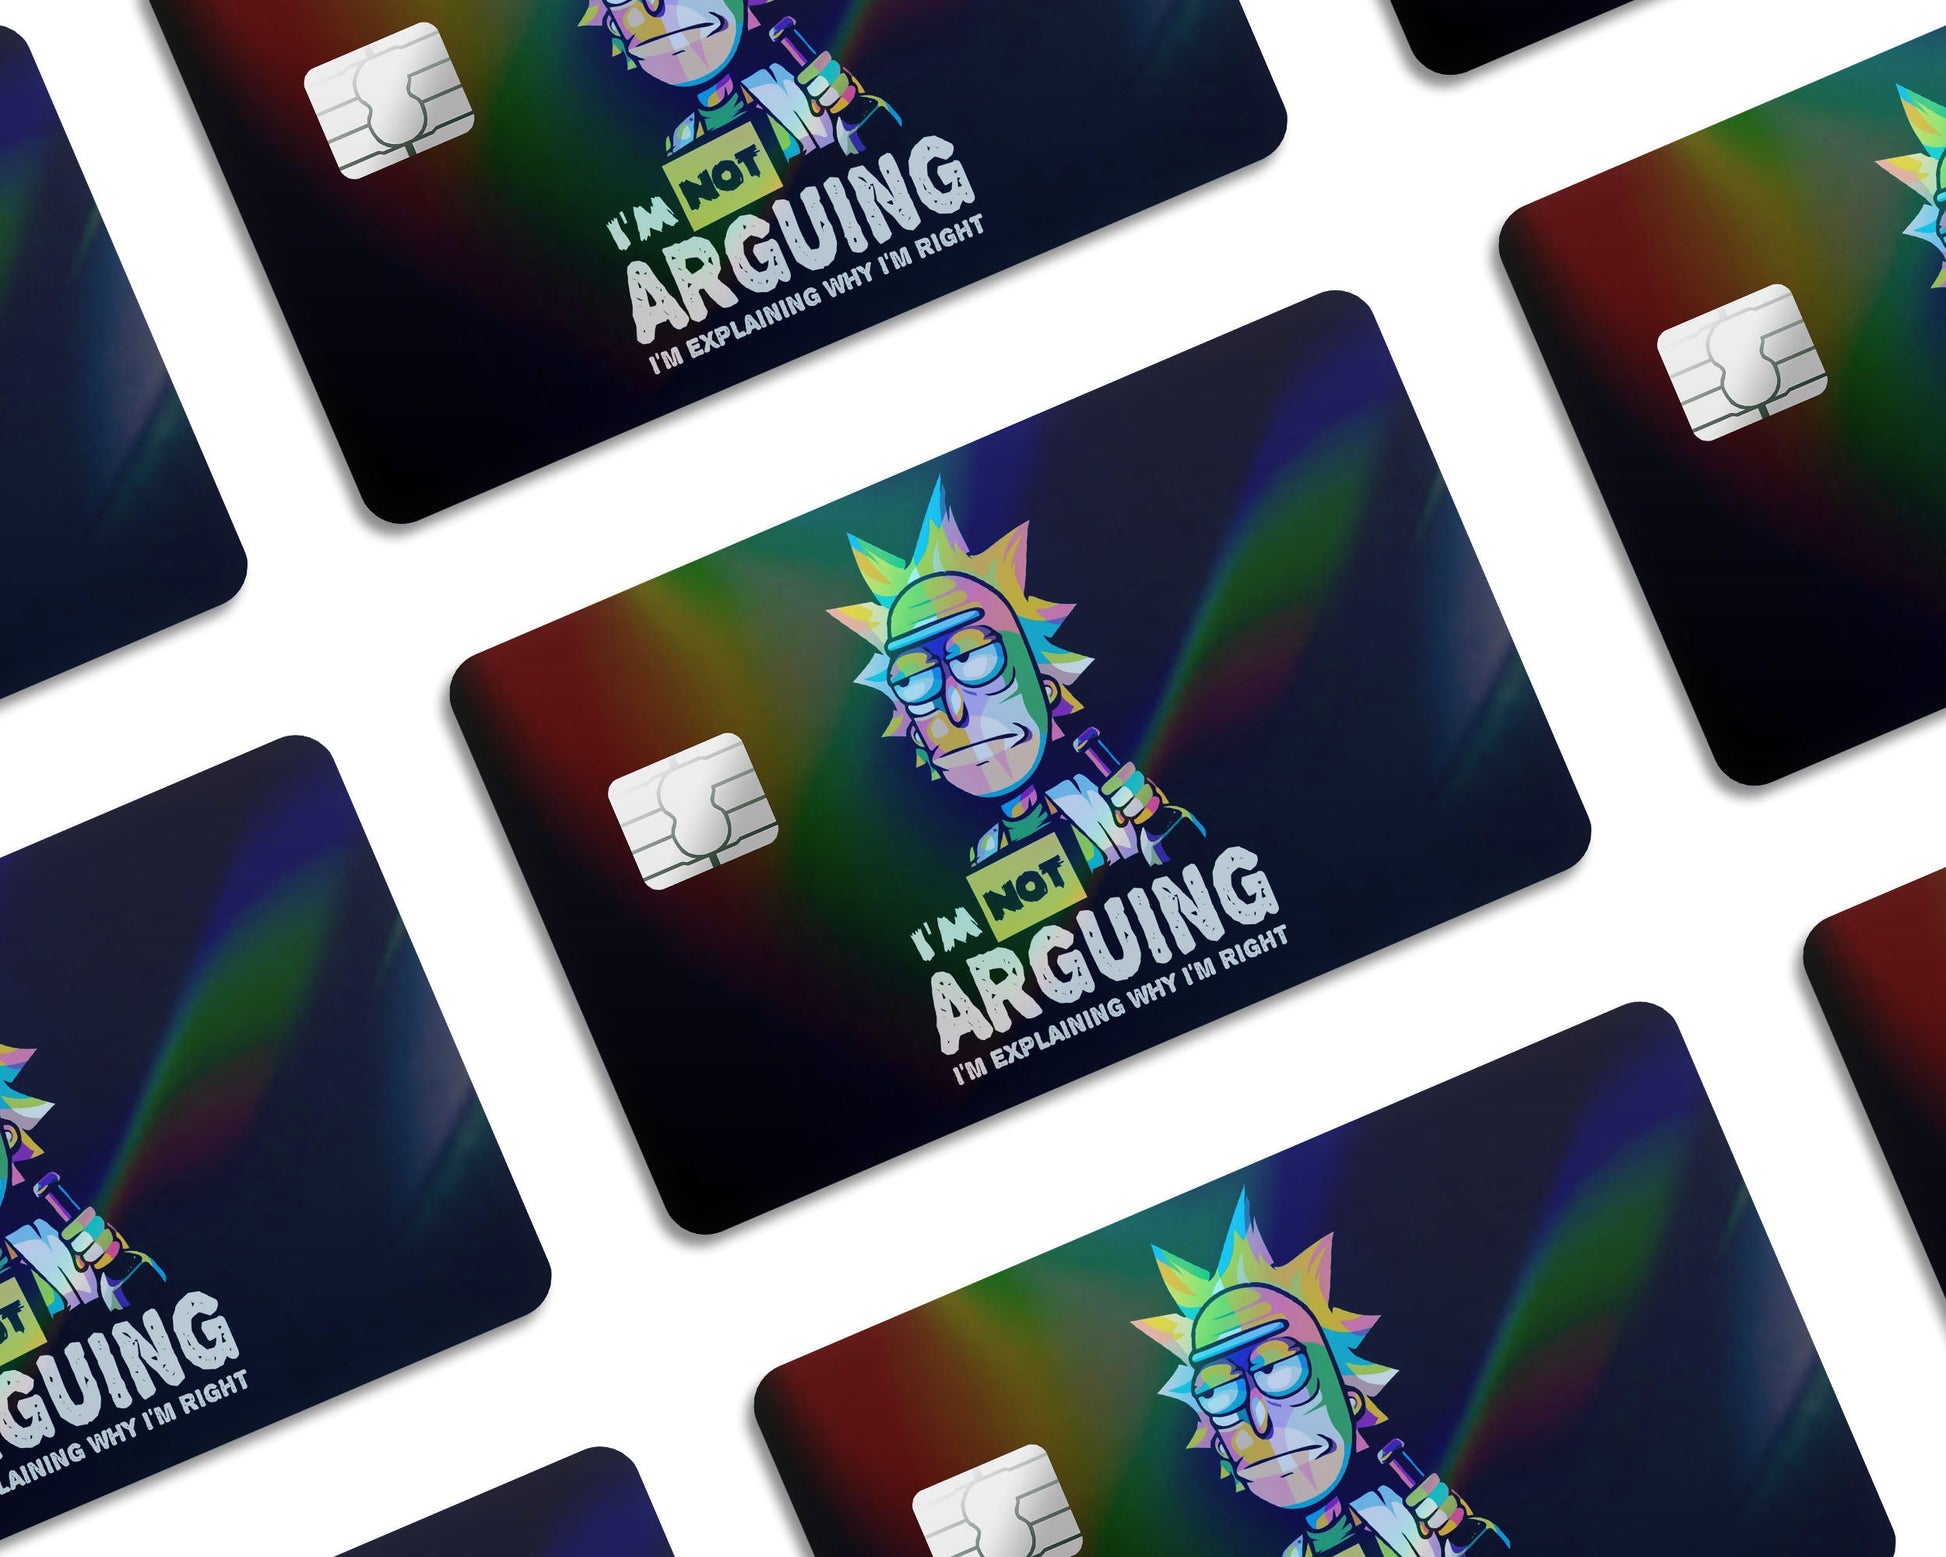 Anime Town Creations Holographic Credit Card Rick I'm not Arguing Window Skins - Anime Rick and Morty Holographic Credit Card Skin